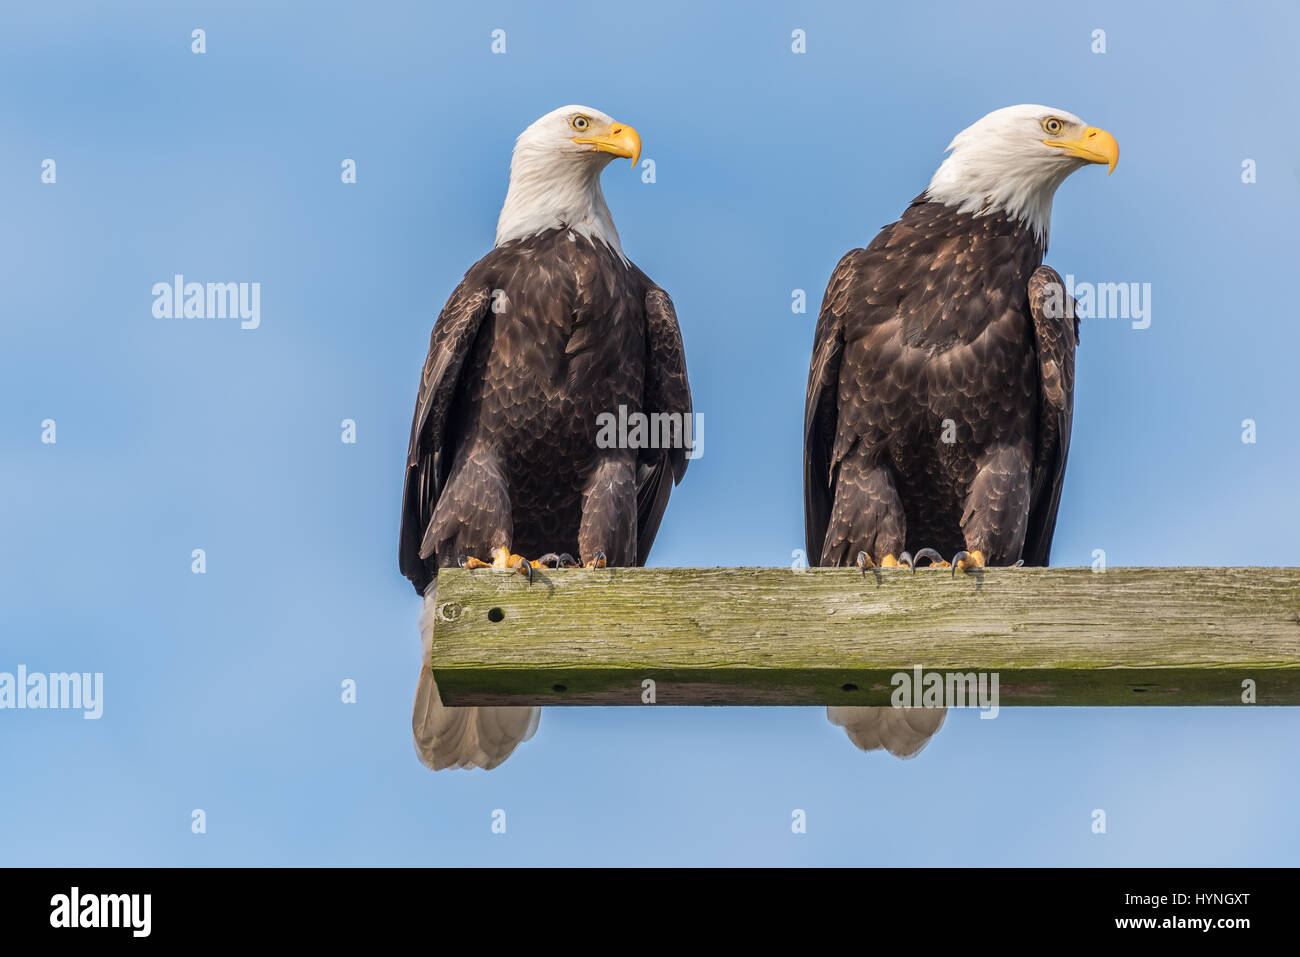 Pair of mature bald eagle watching while perched on a wooden telephone pole against a blue sky in the Skagit valley of Washington State Stock Photo